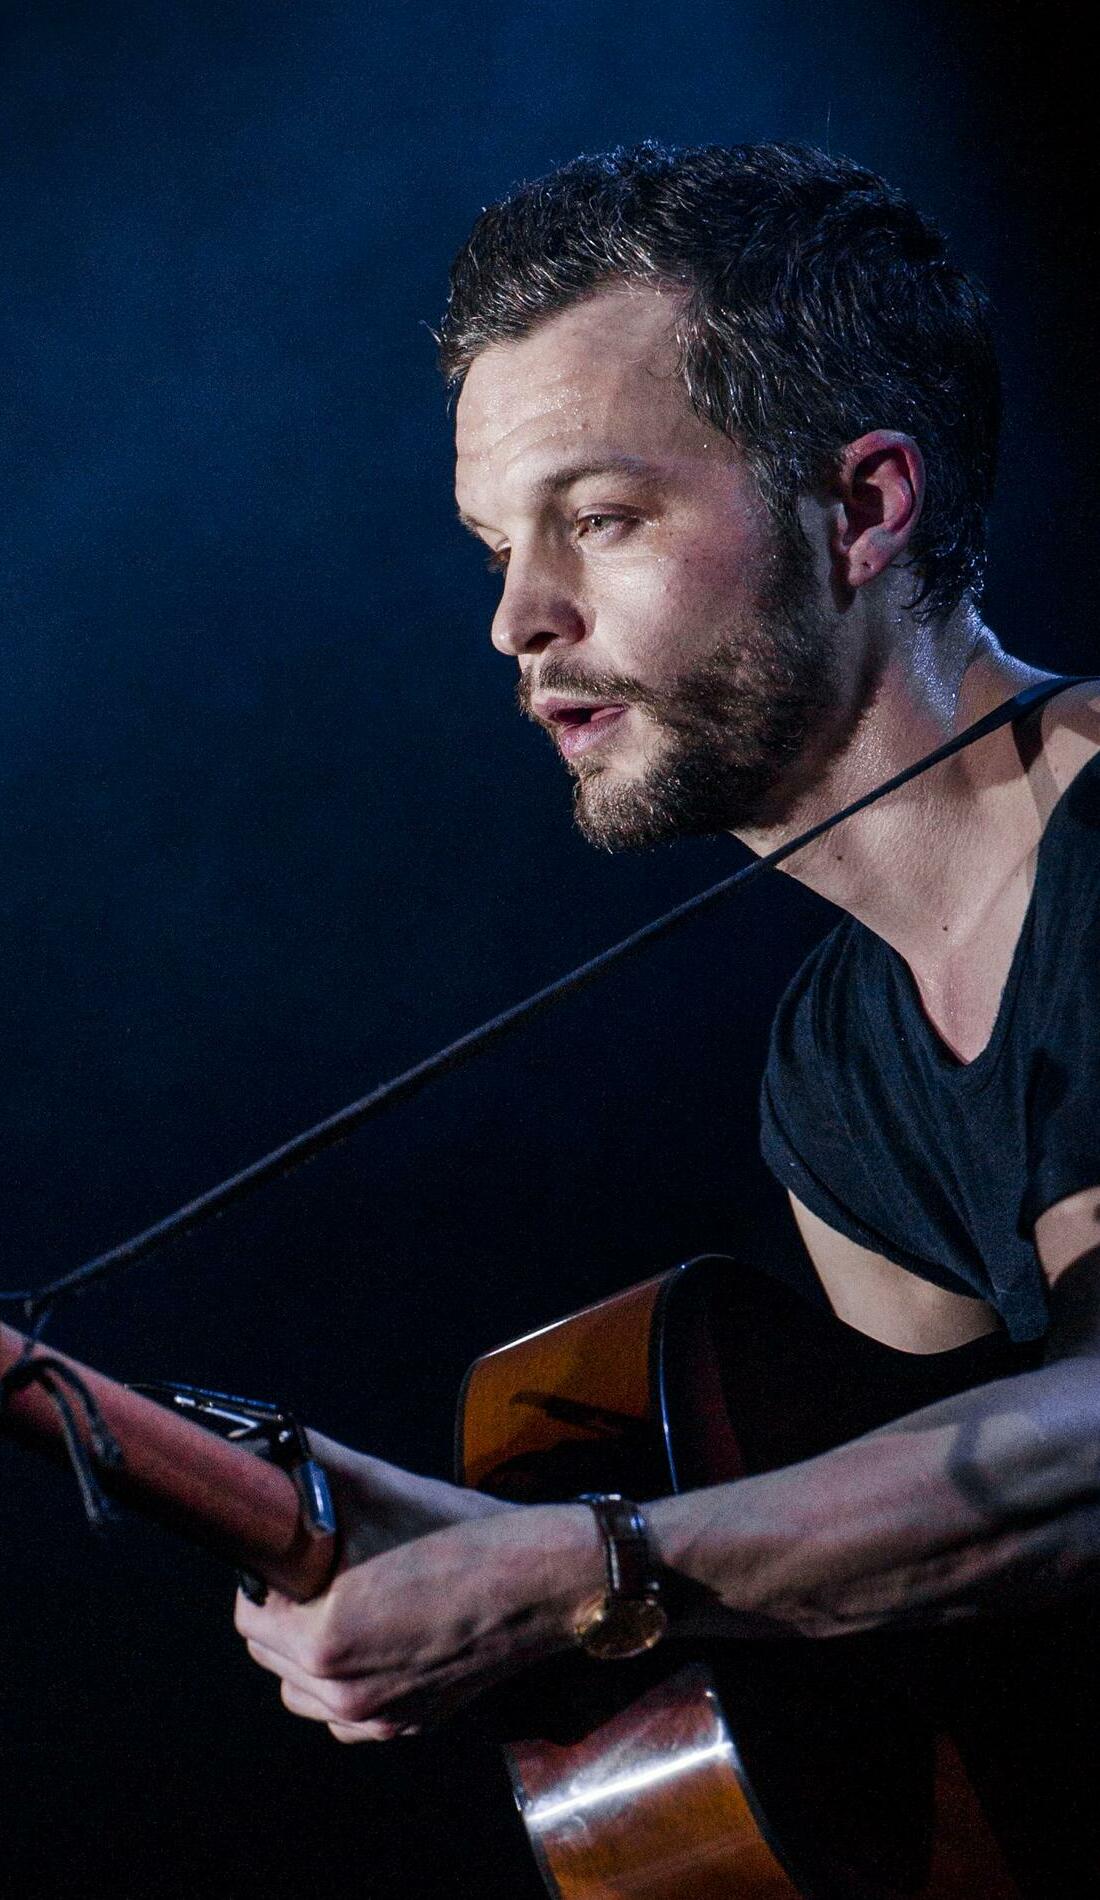 A The Tallest Man On Earth live event